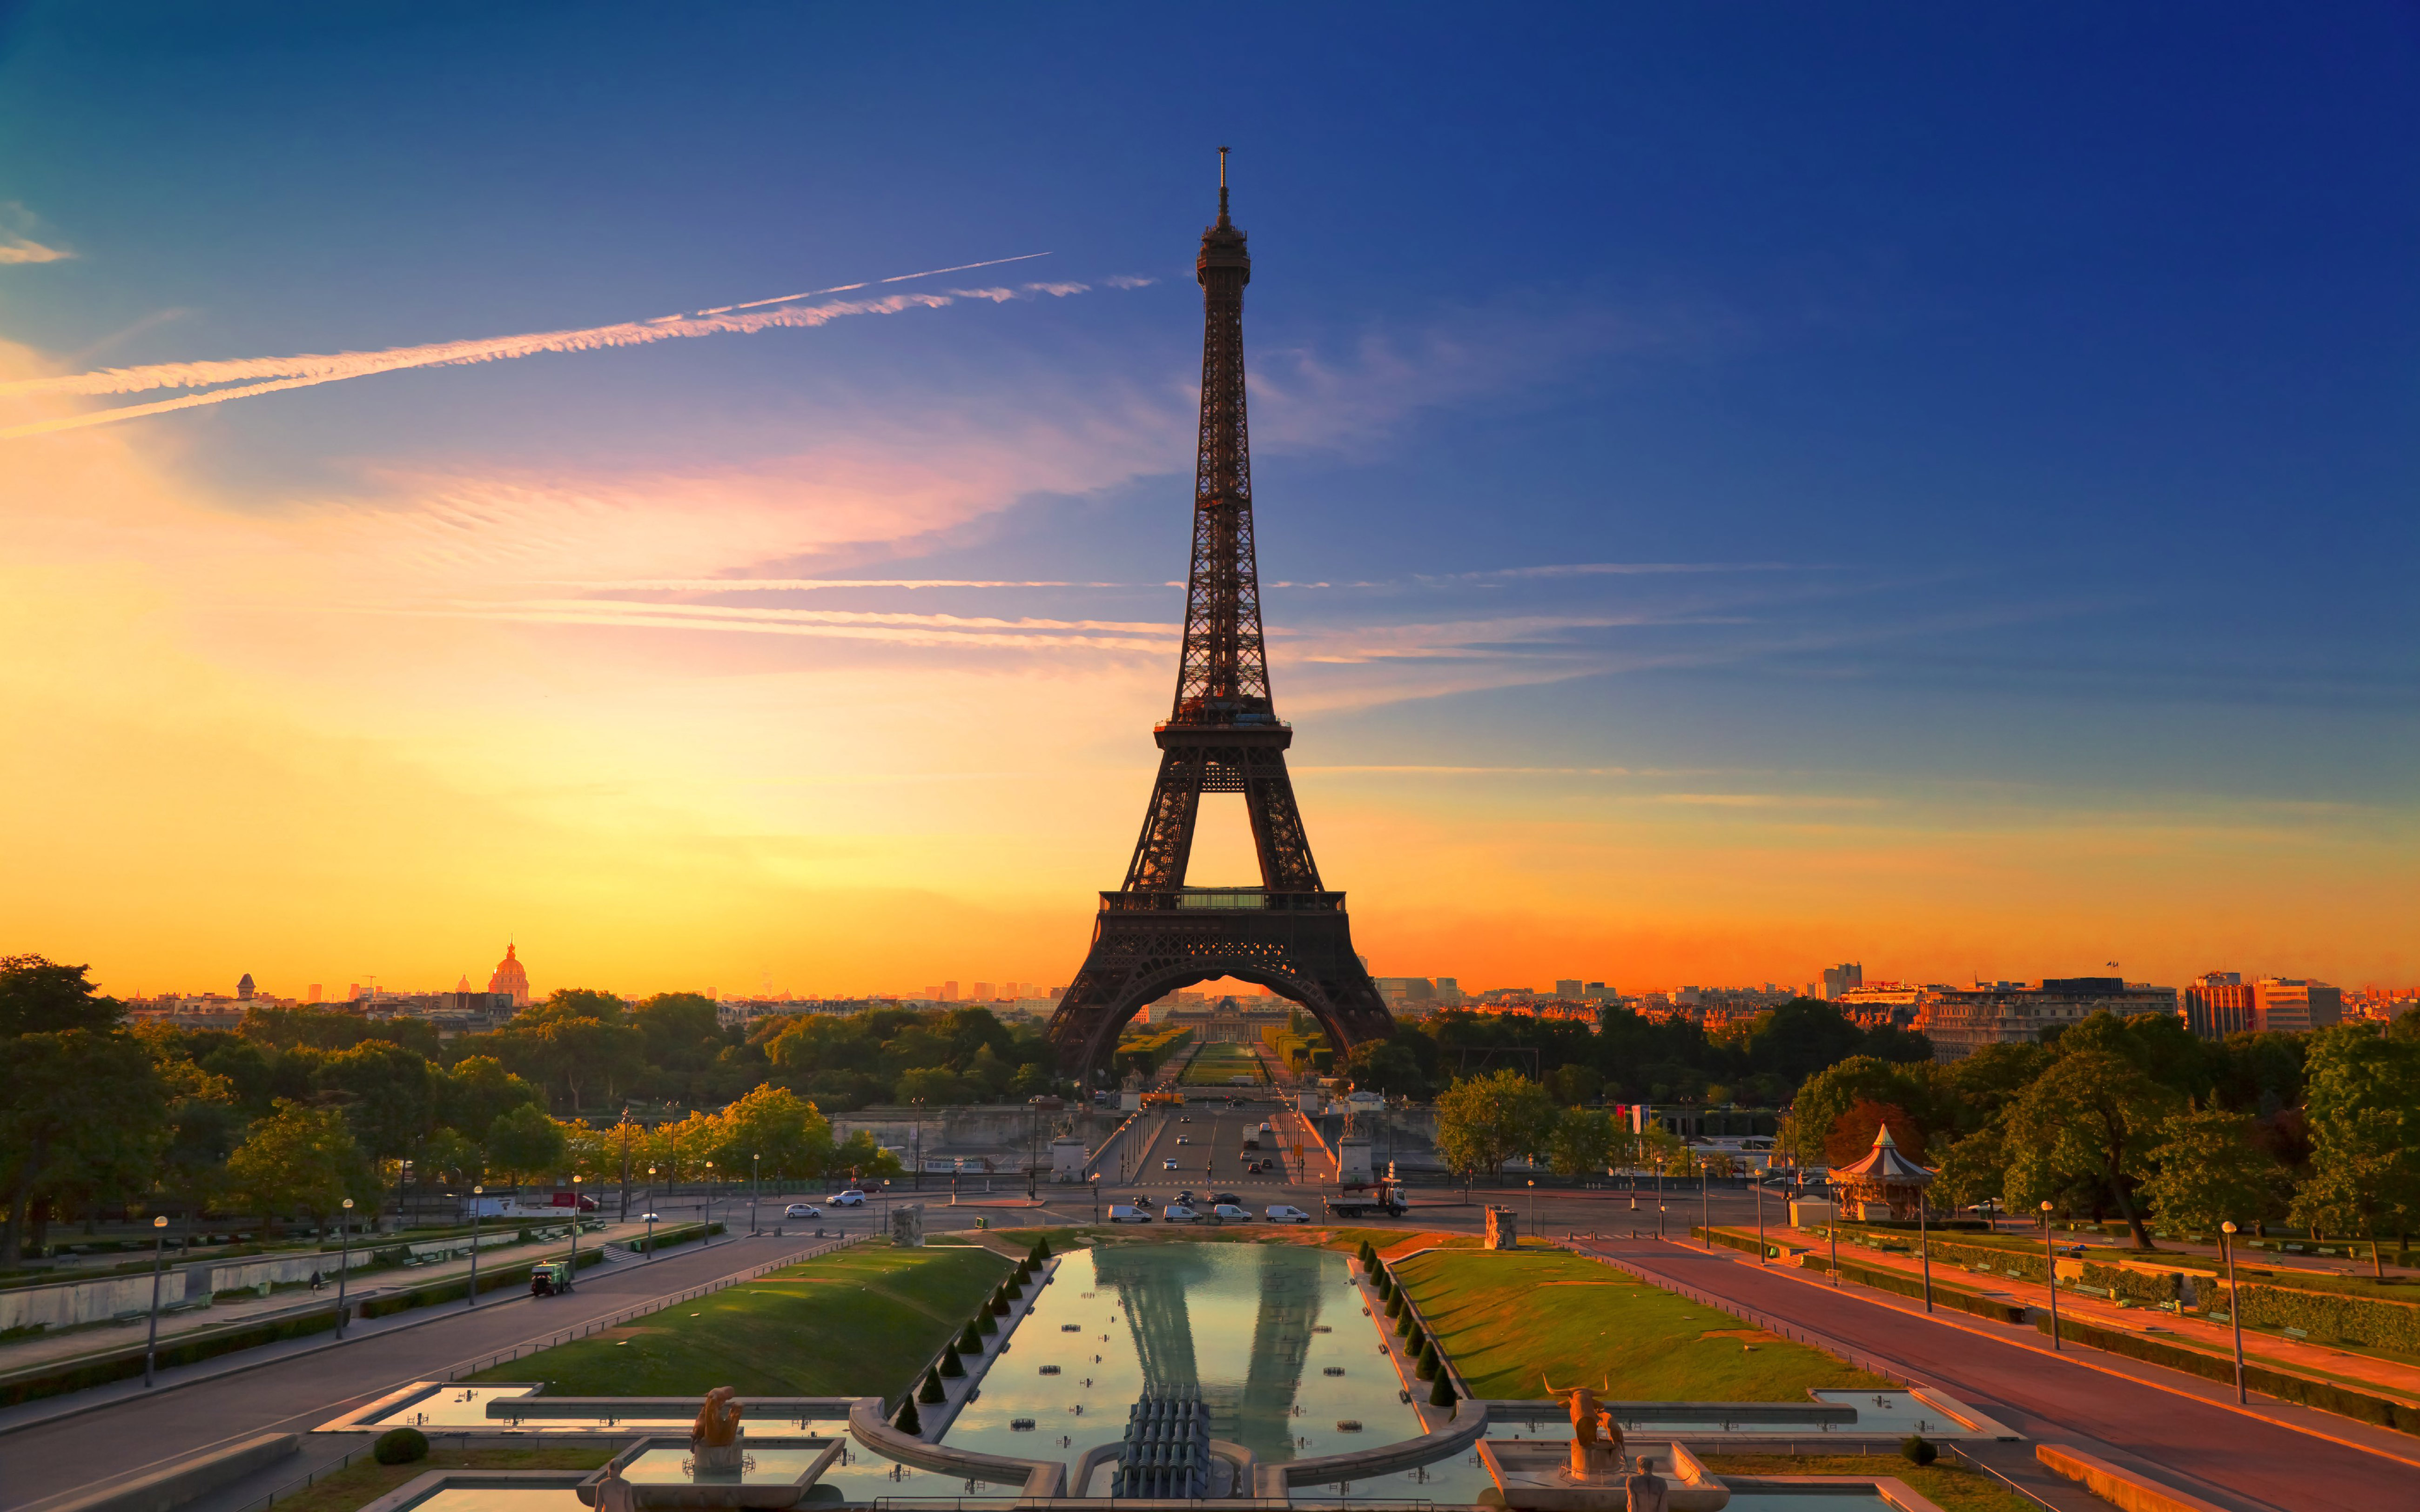 Paris Eiffel Tower Sunrise City The In The Early Hours Desktop Wallpaper HD For Mobile Phones And Laptops 5200x3250, Wallpaper13.com